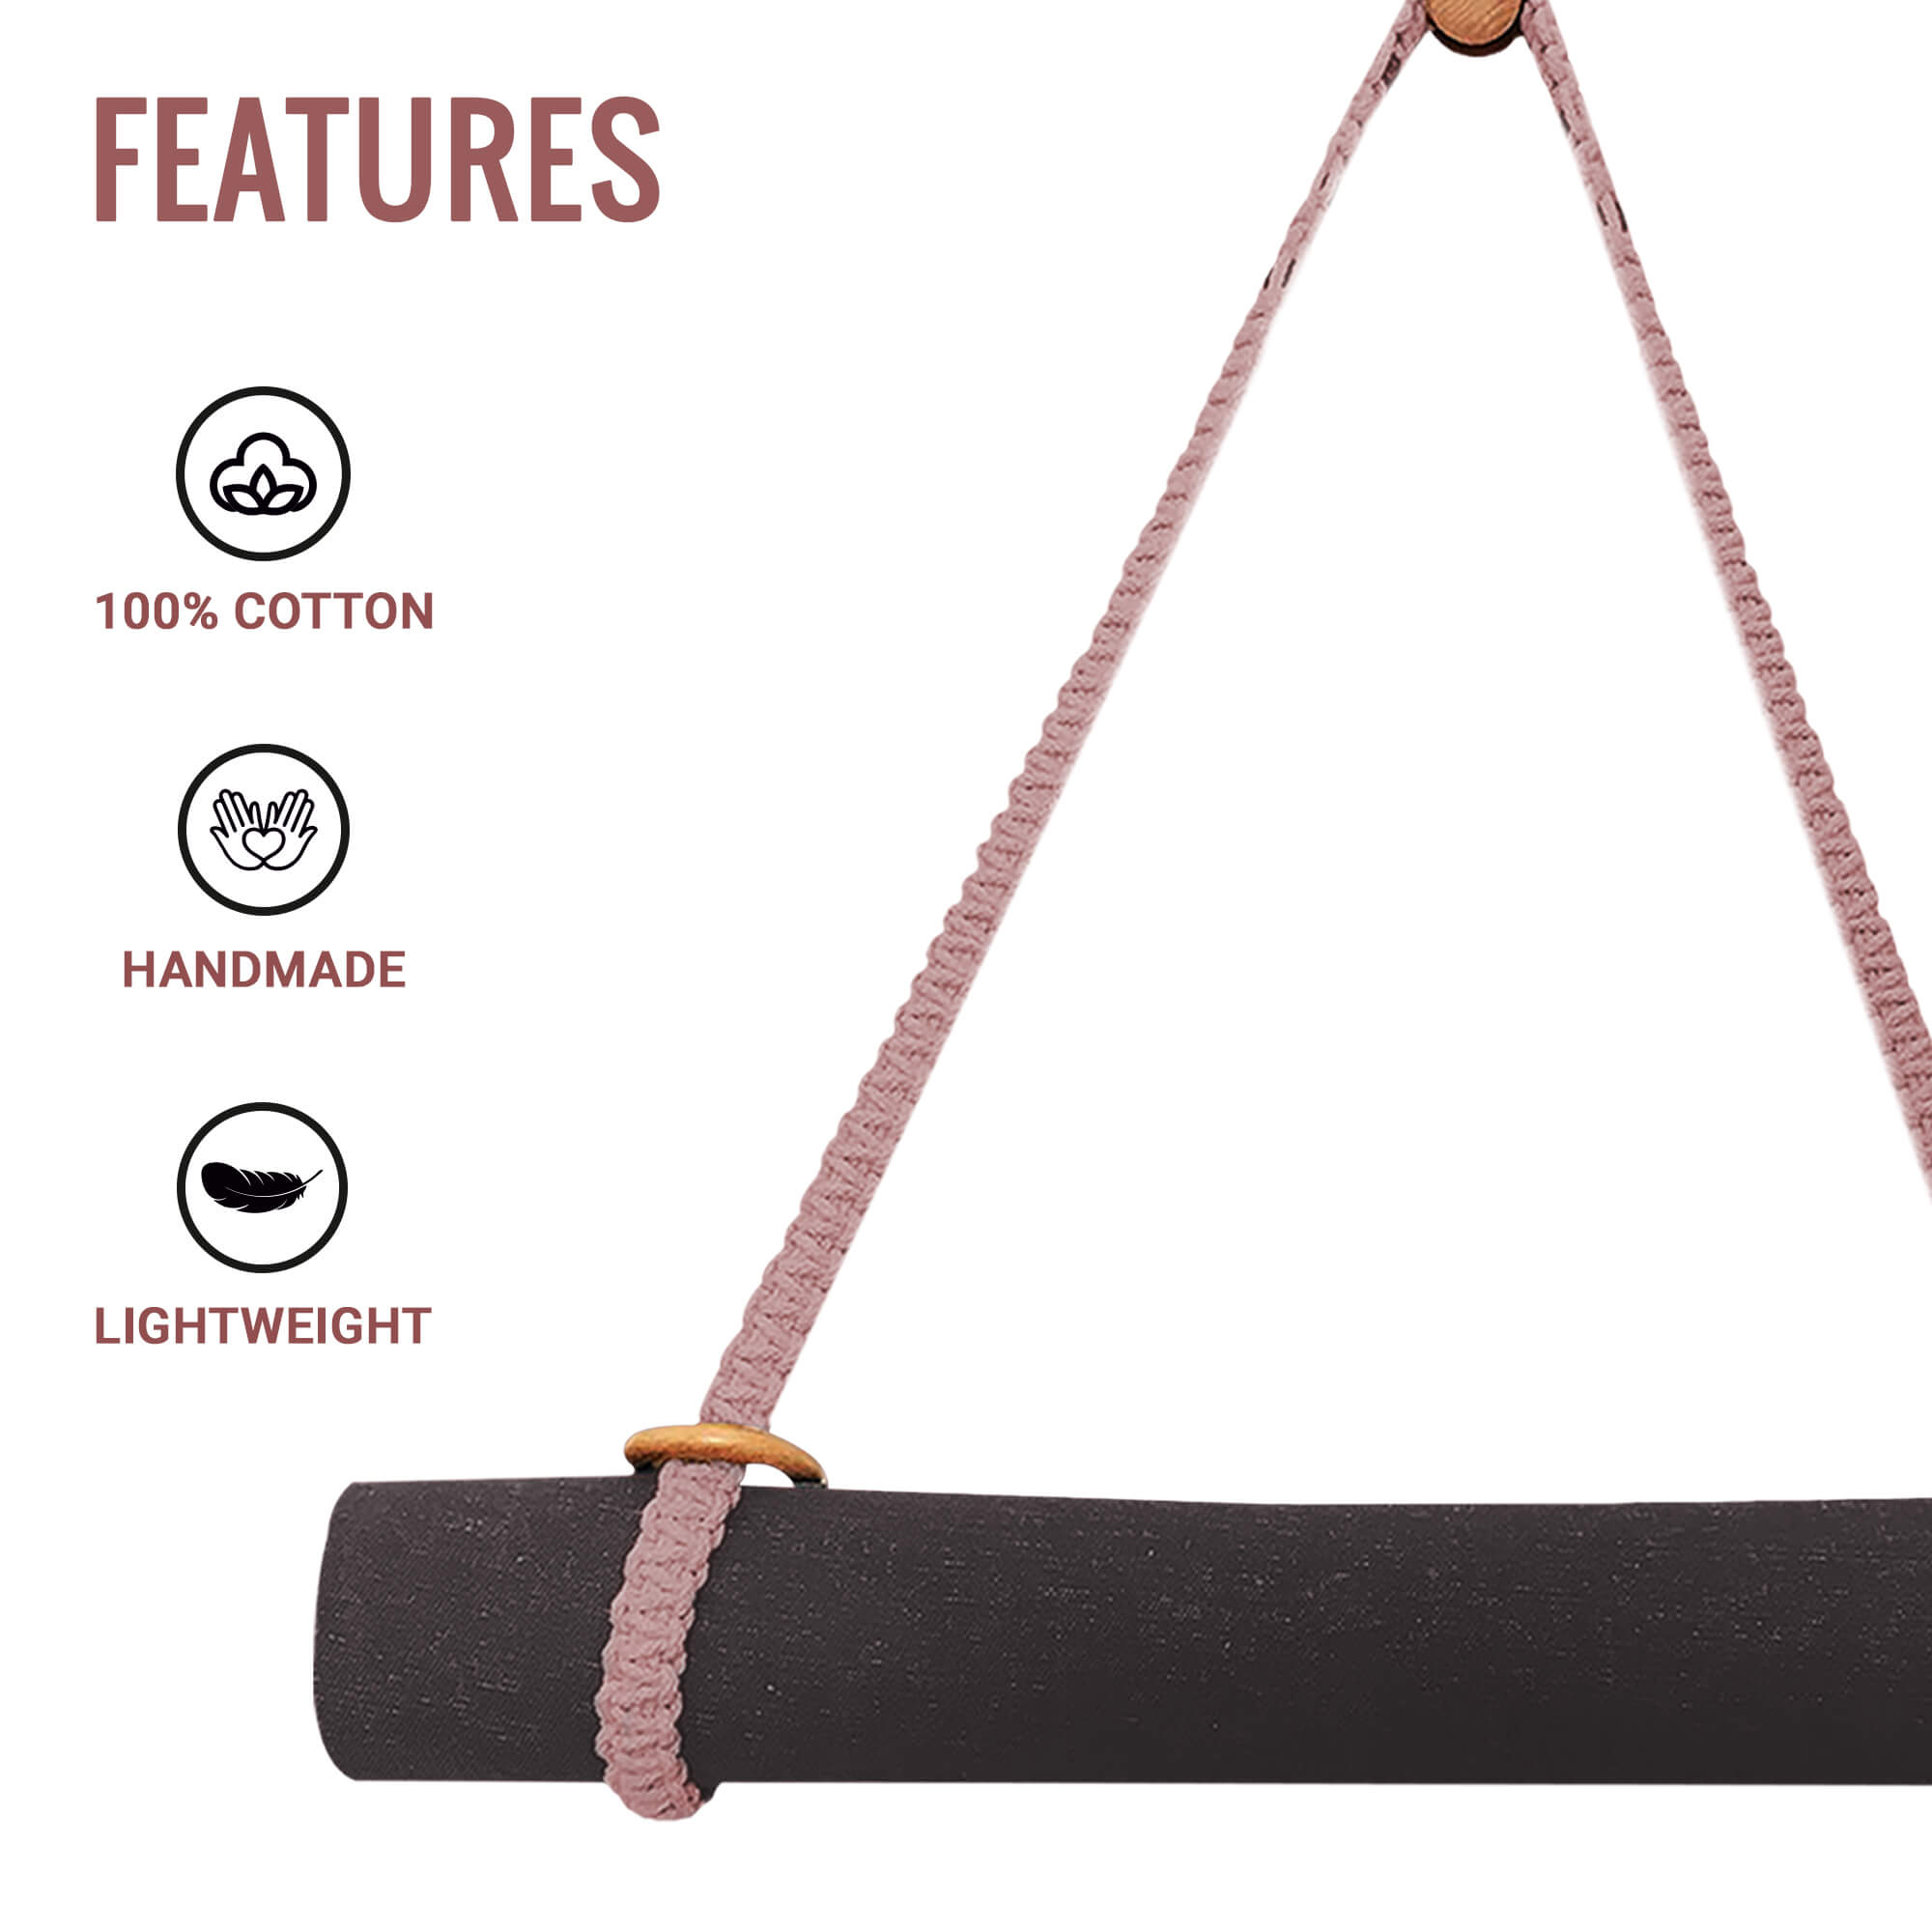 PowerMax Fitness Boho Hand Woven Yoga Mat Carrying Strap for Comfort Ease and Style